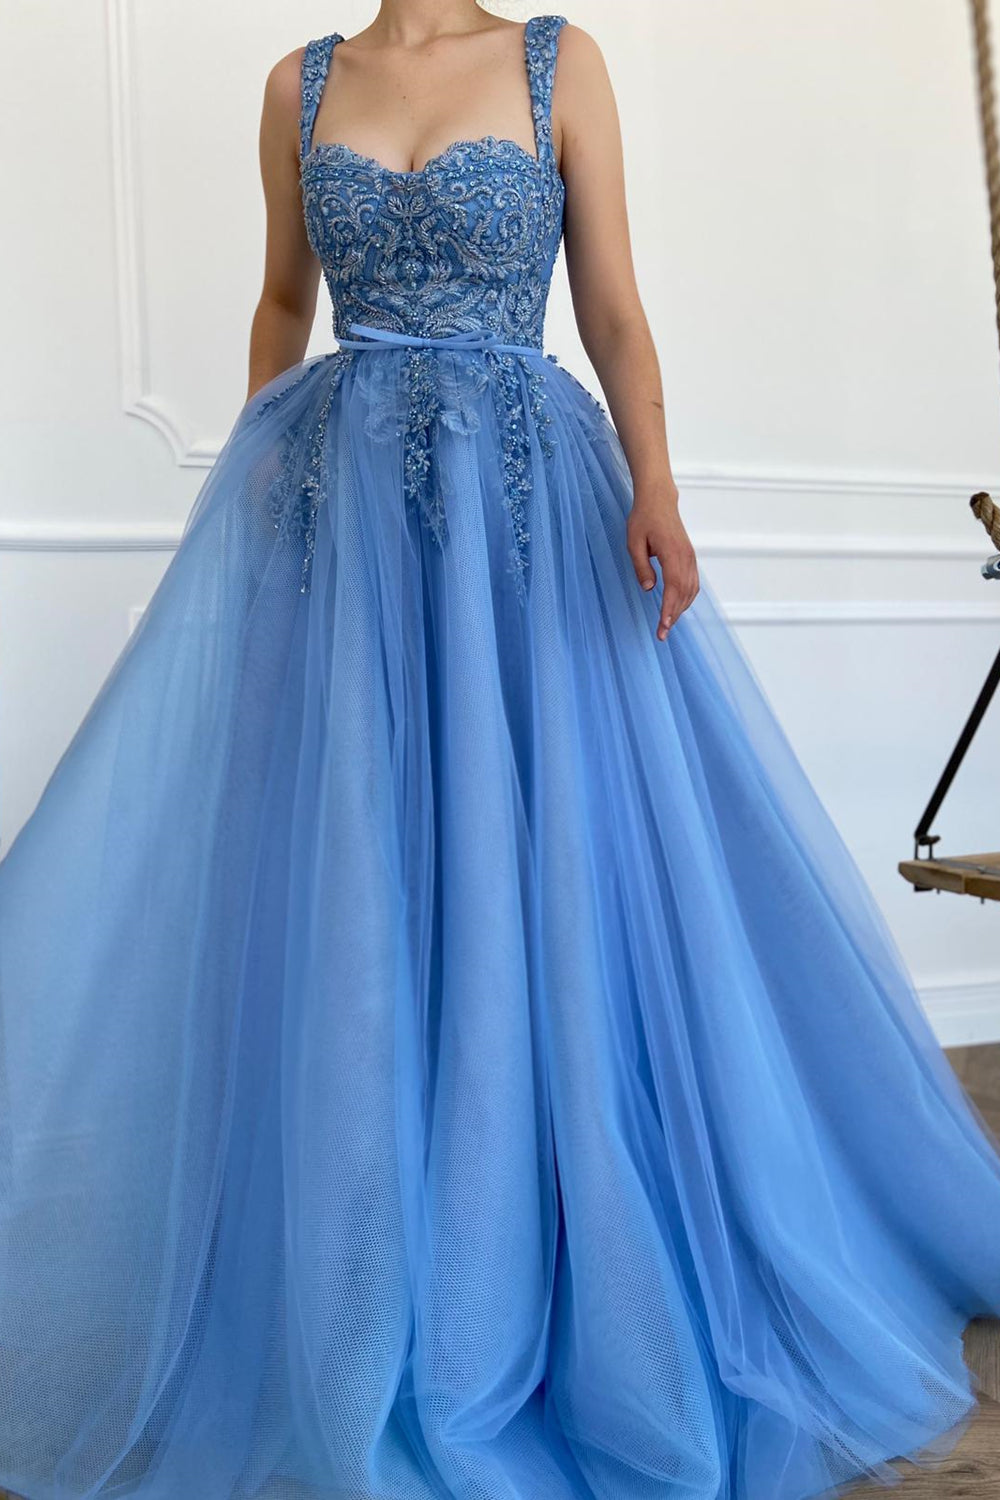 Sweetheart Neck Blue Lace Long Prom Dresses, Blue Lace Formal Evening Dresses EP1466